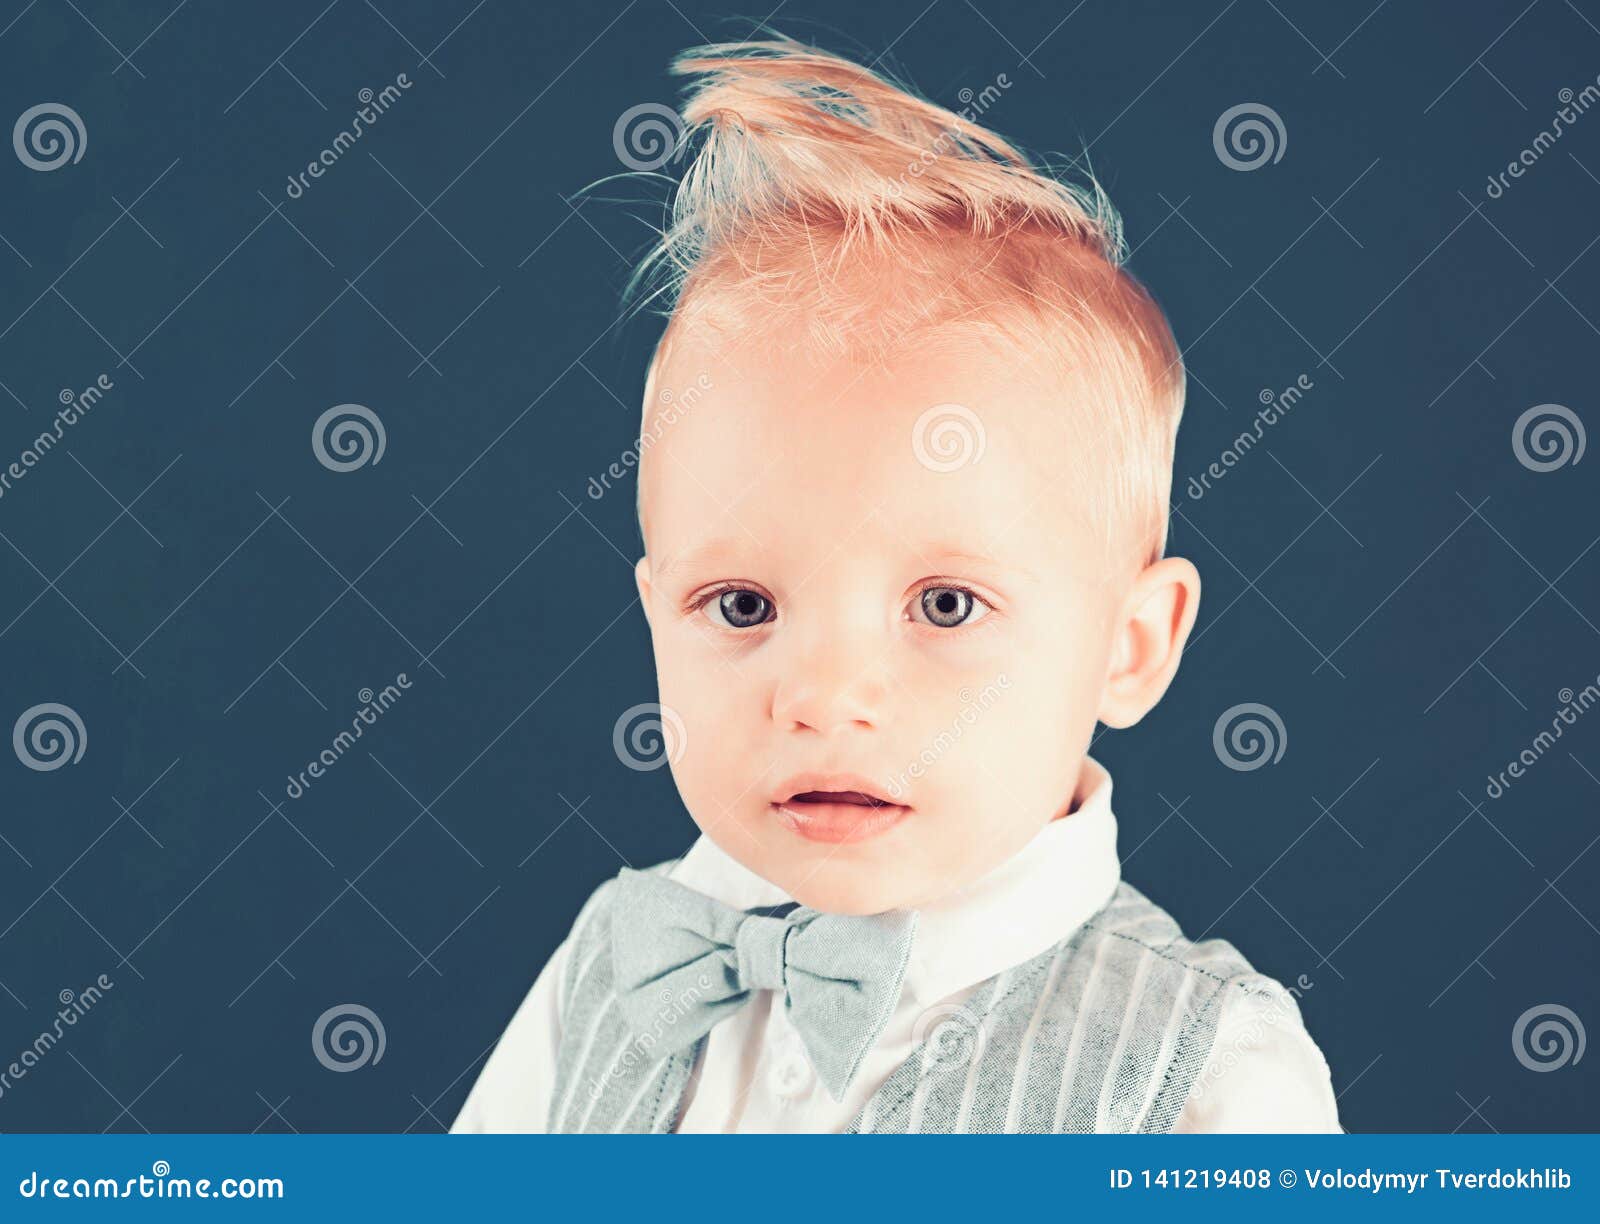 Haircut, always Going To Be in Style. Little Child with Messy Top Haircut.  Boy Child with Stylish Blond Hair Stock Photo - Image of blonde, childhood:  141219408